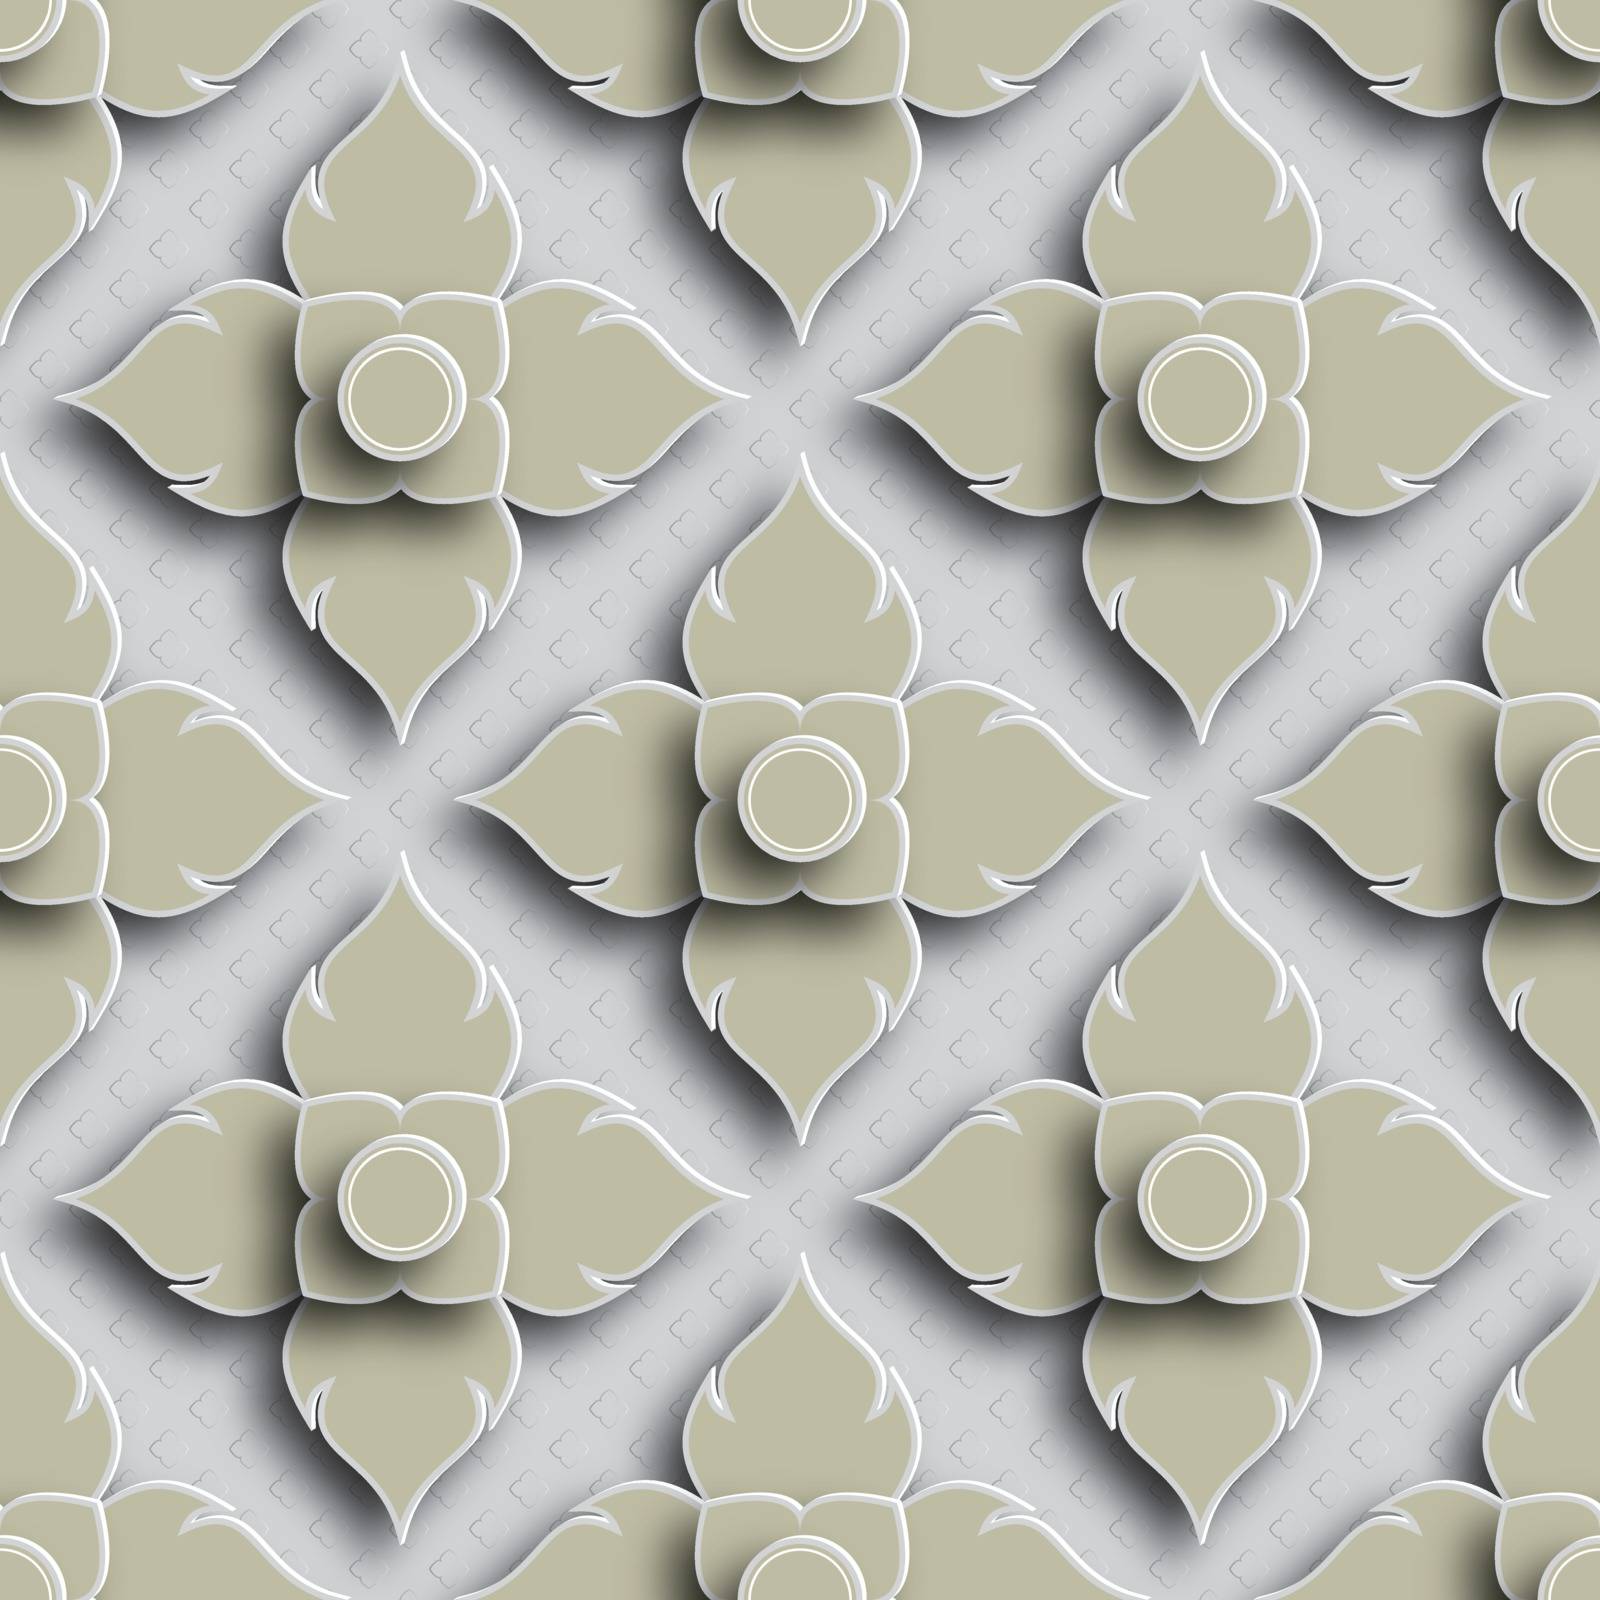 Thai pattern background with 3d style